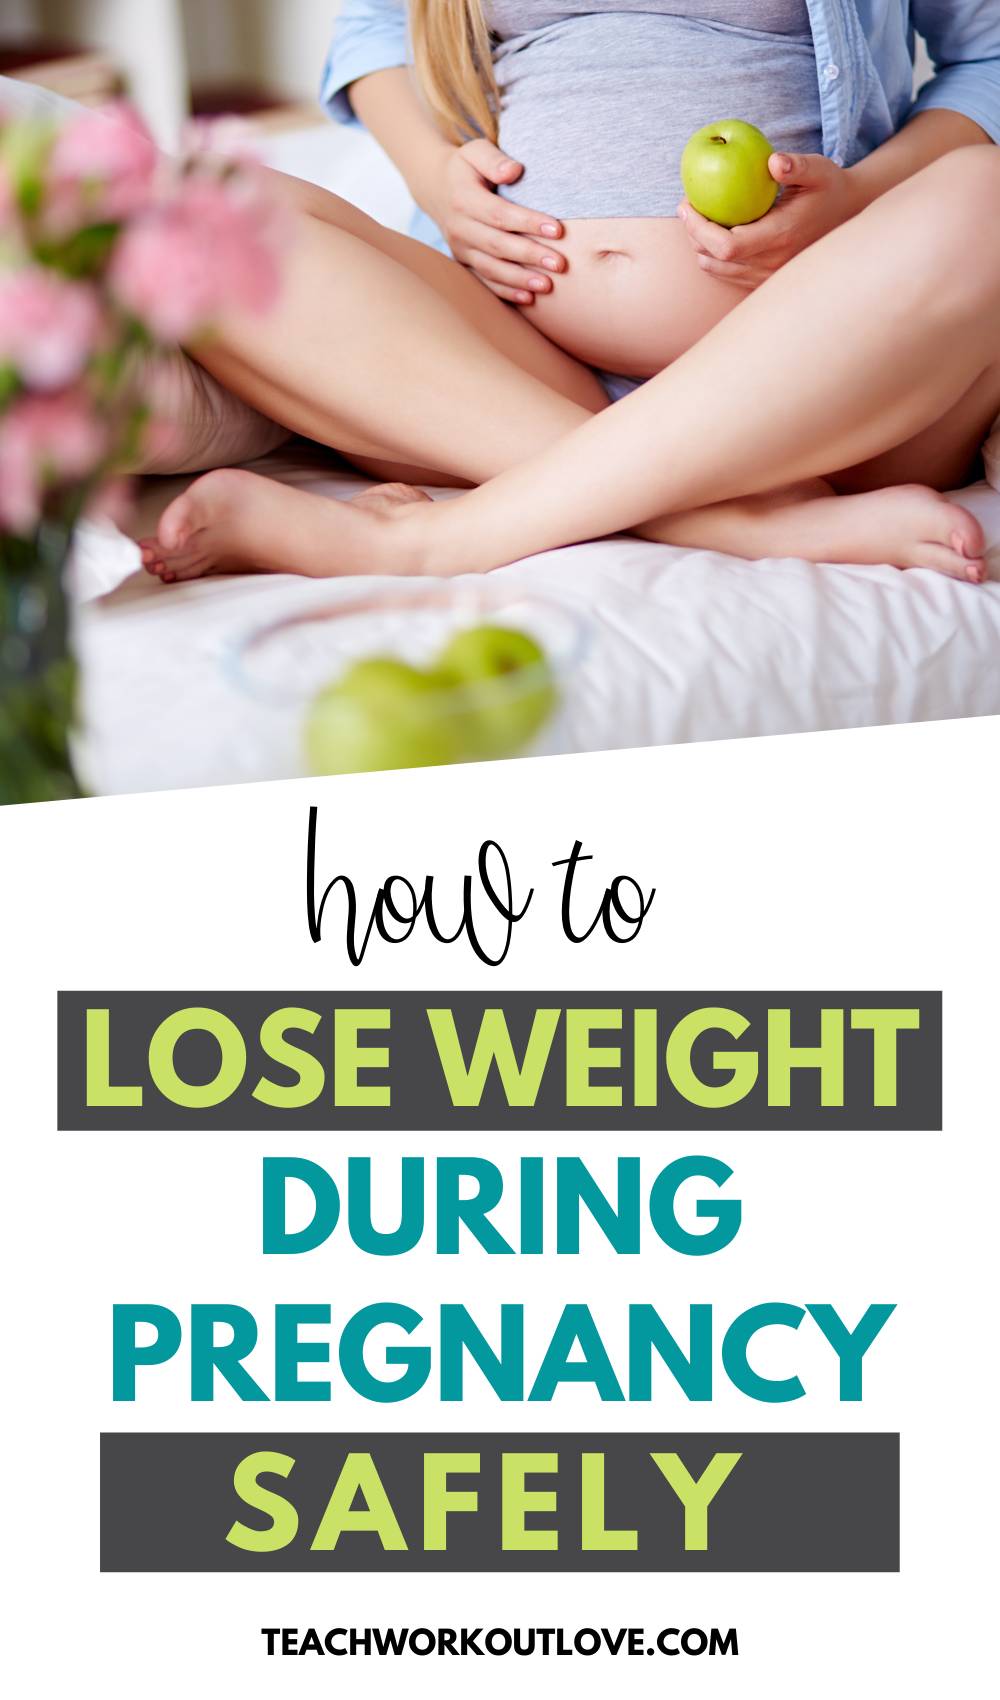 Gaining weight is natural during pregnancy periods. Read on how this could affect their pregnancy and wonder whether it is safe to lose weight at this time.